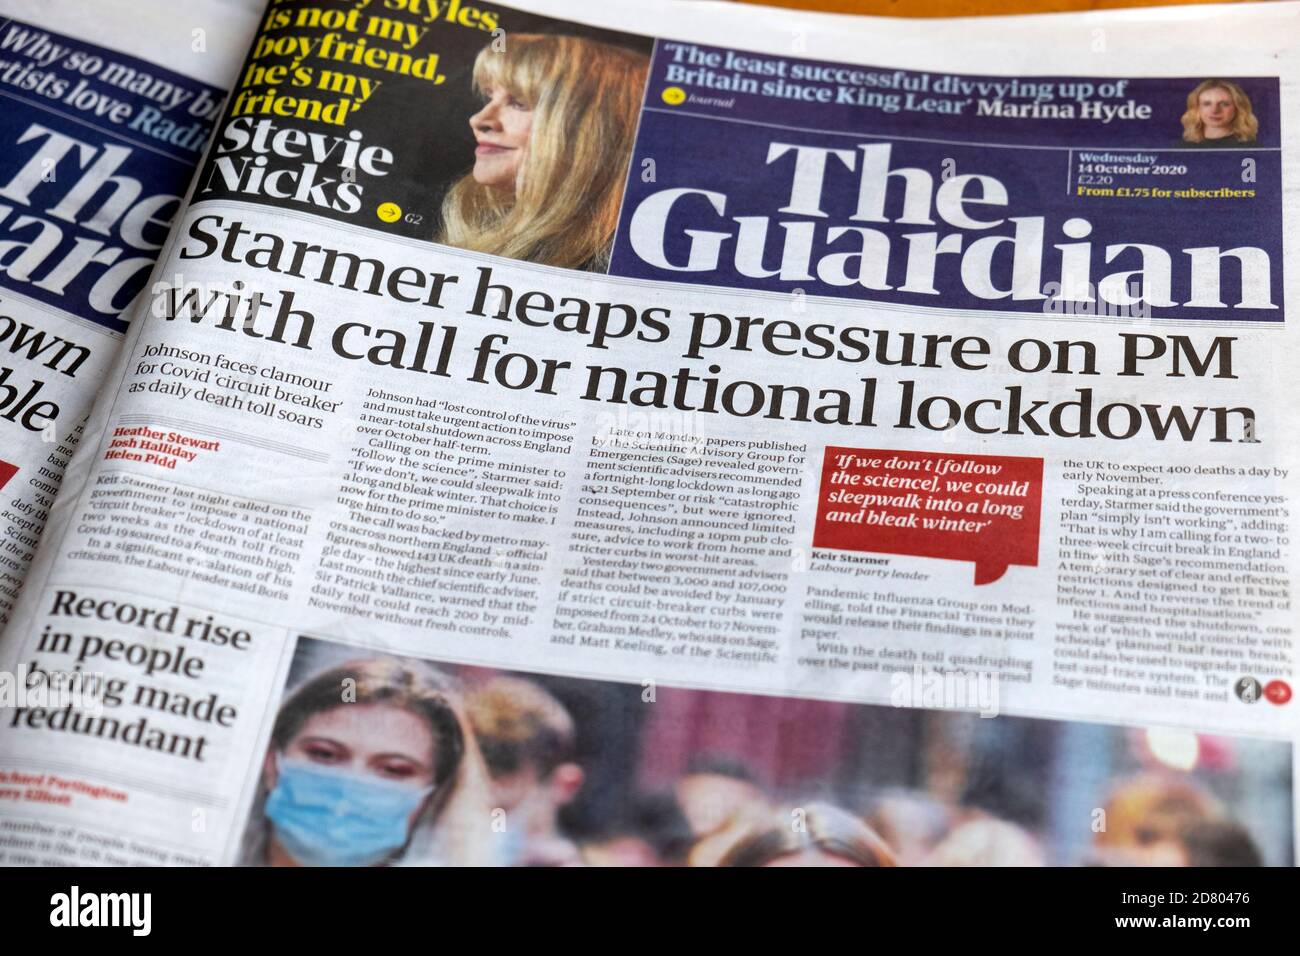 Keir 'Starmer heaps pressure on PM with call for national lockdown' front page article Guardian newspaper headline on14 October 2020 in London UK Stock Photo